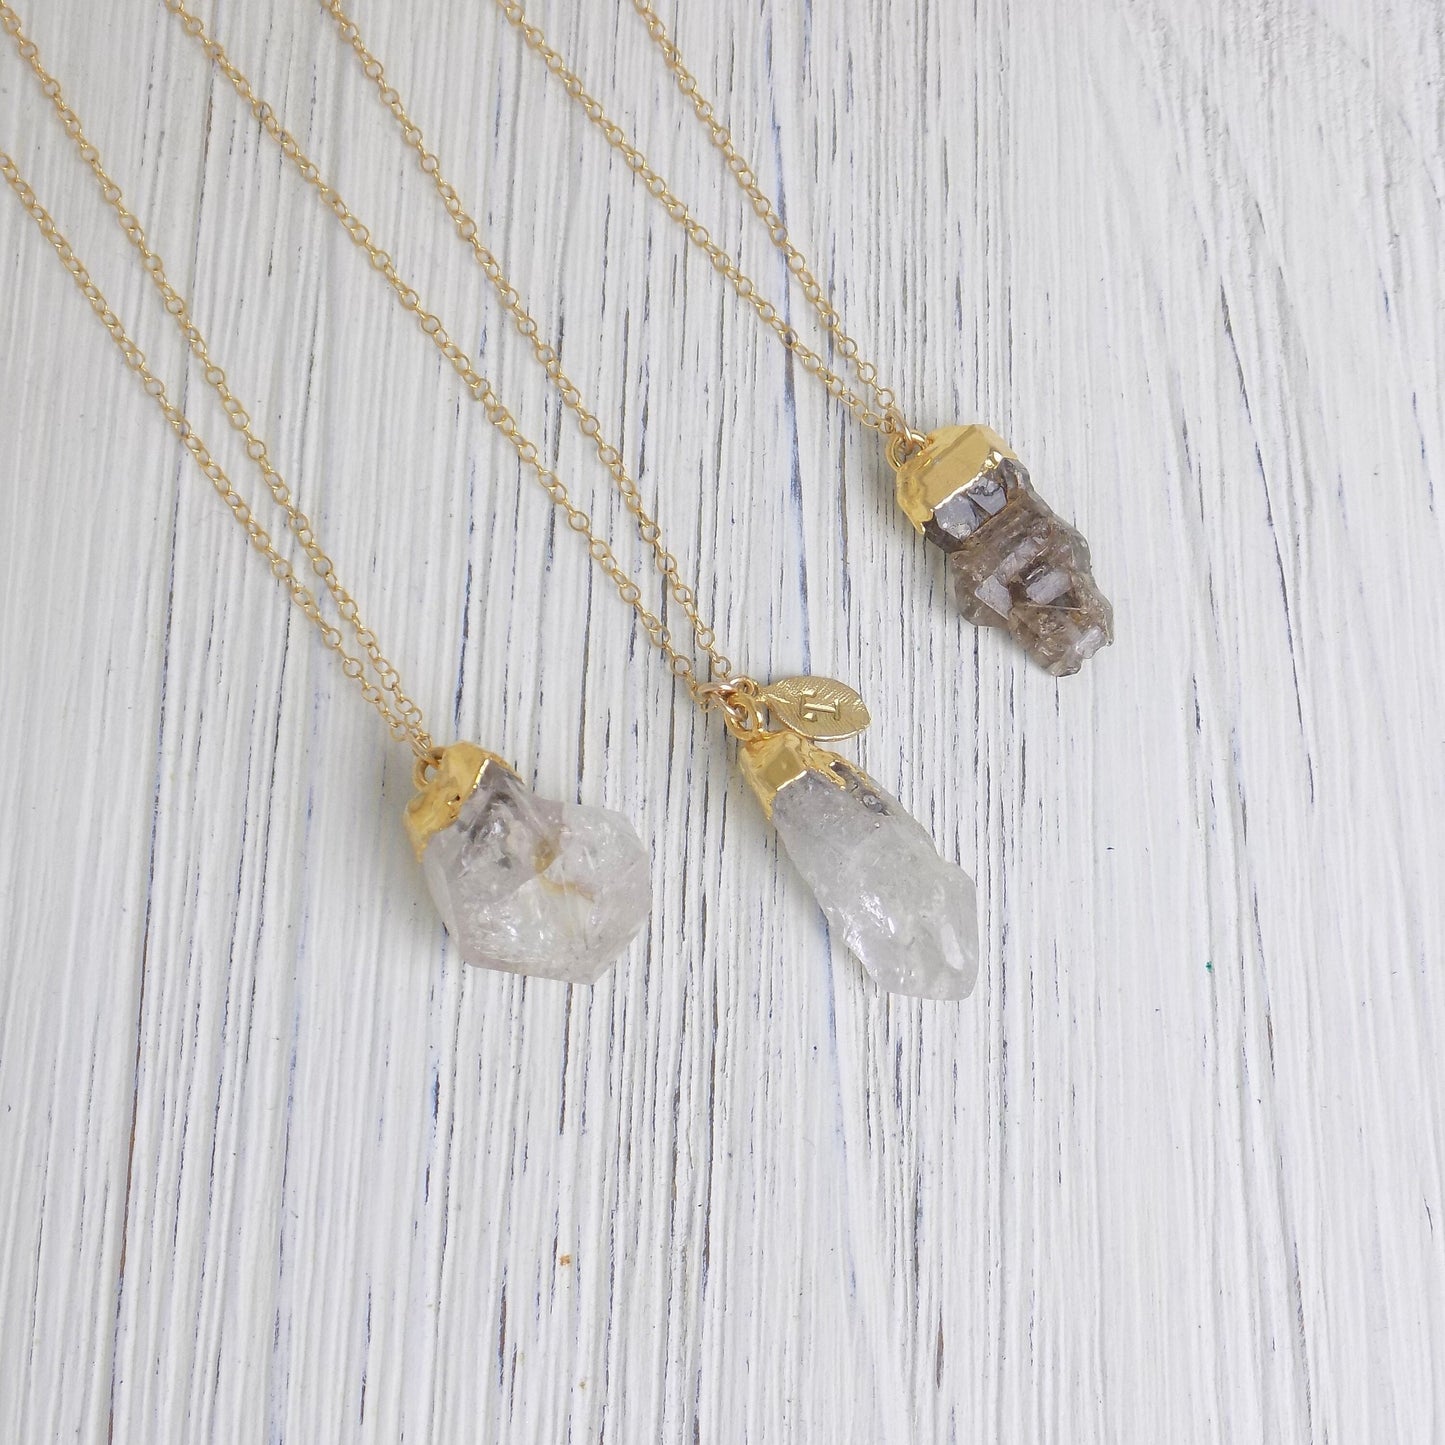 Custom Raw Herkimer Diamond Natural Gemstone Necklace on 14K Gold Filled Chain with Stamped Initial Charm, M6-29